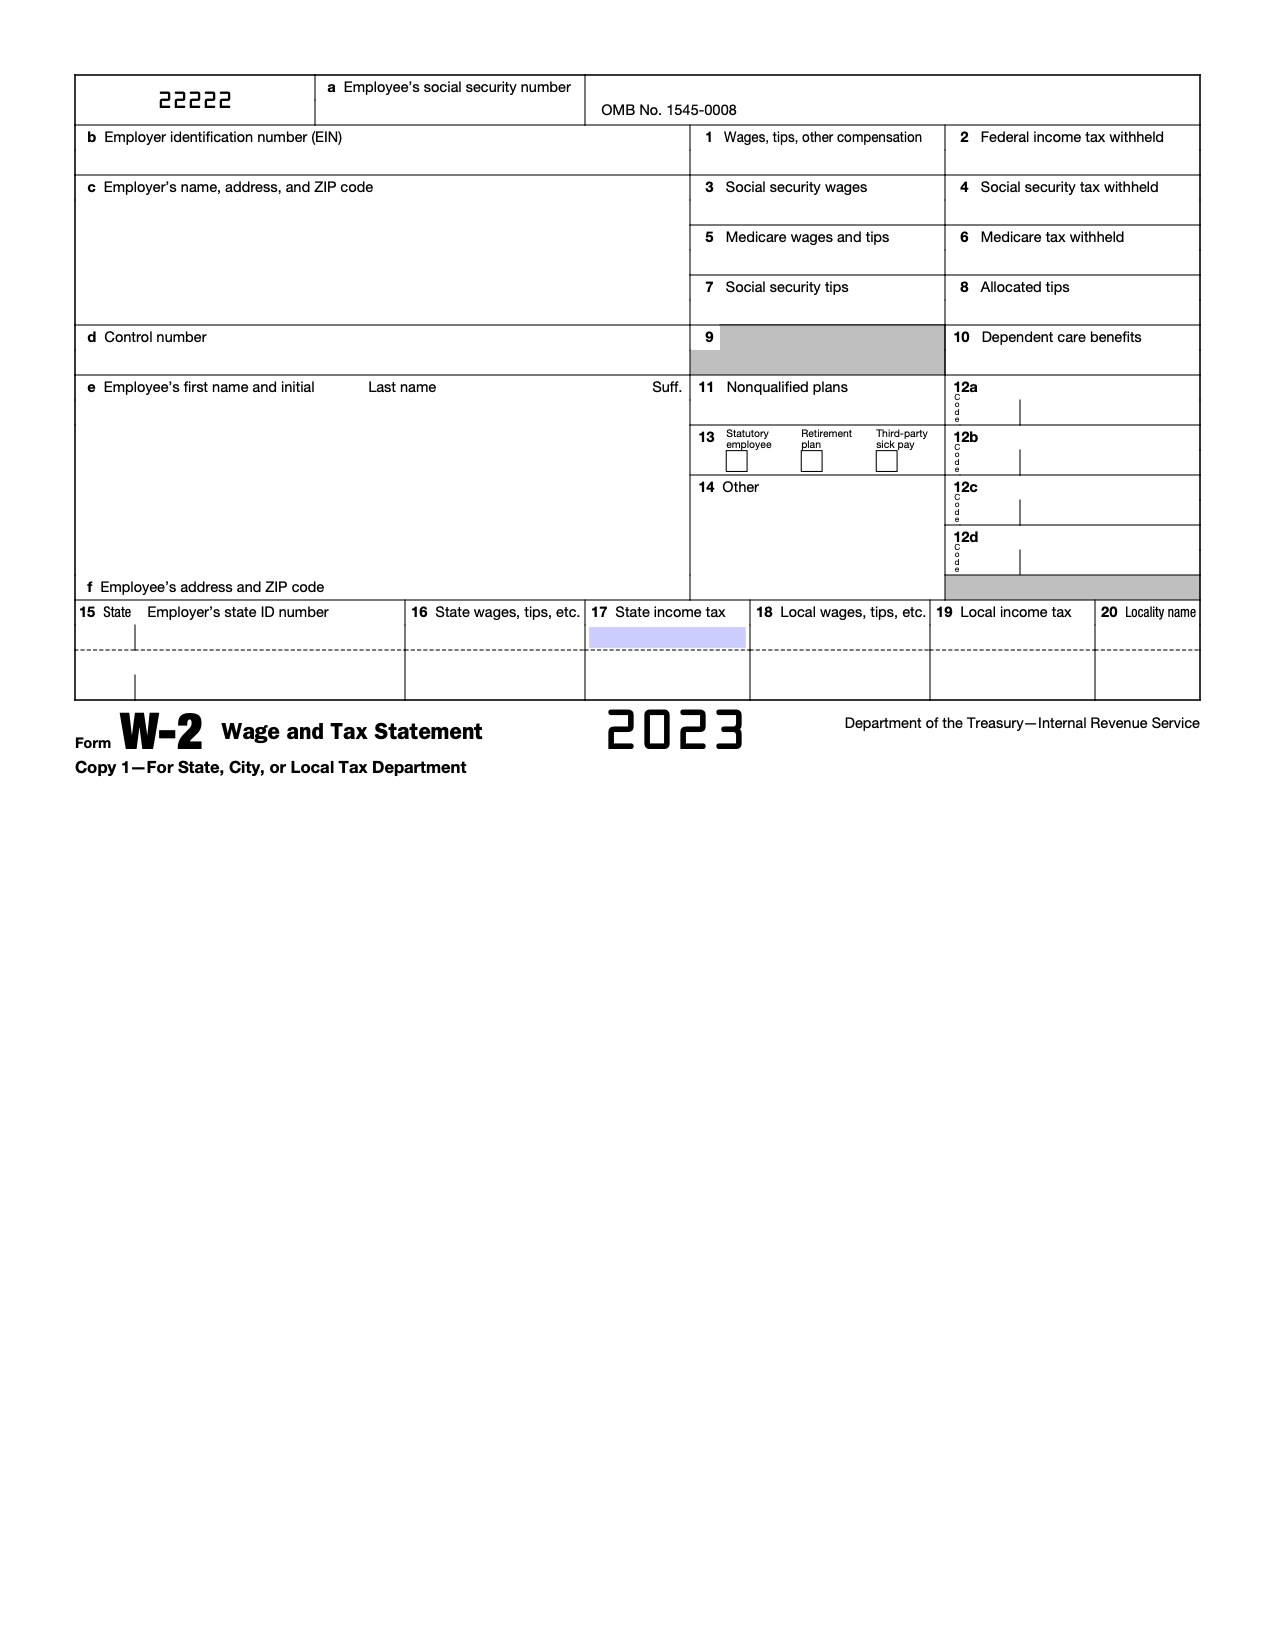 Free Irs Form W-2 | Wage And Tax Statement - Pdf – Eforms with regard to W2 Printable Form